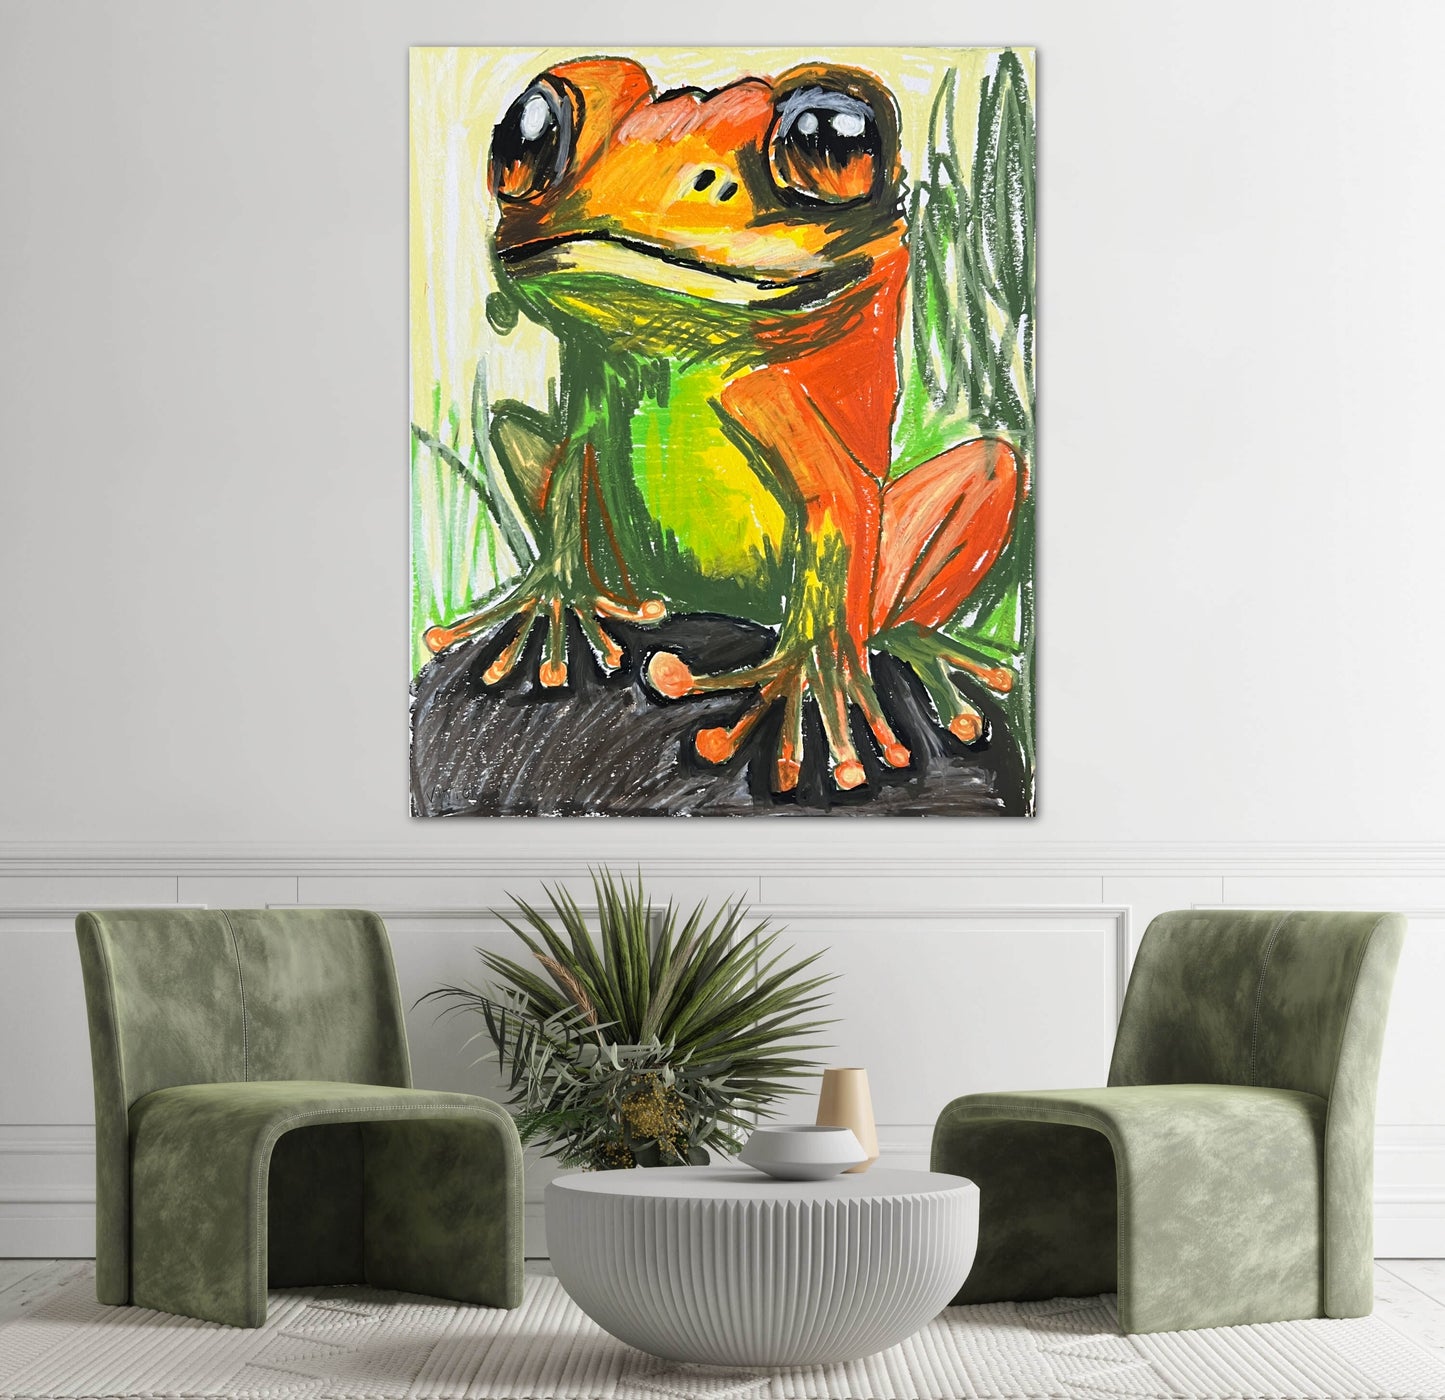 Froggie - fine prints and canvas prints in more sizes